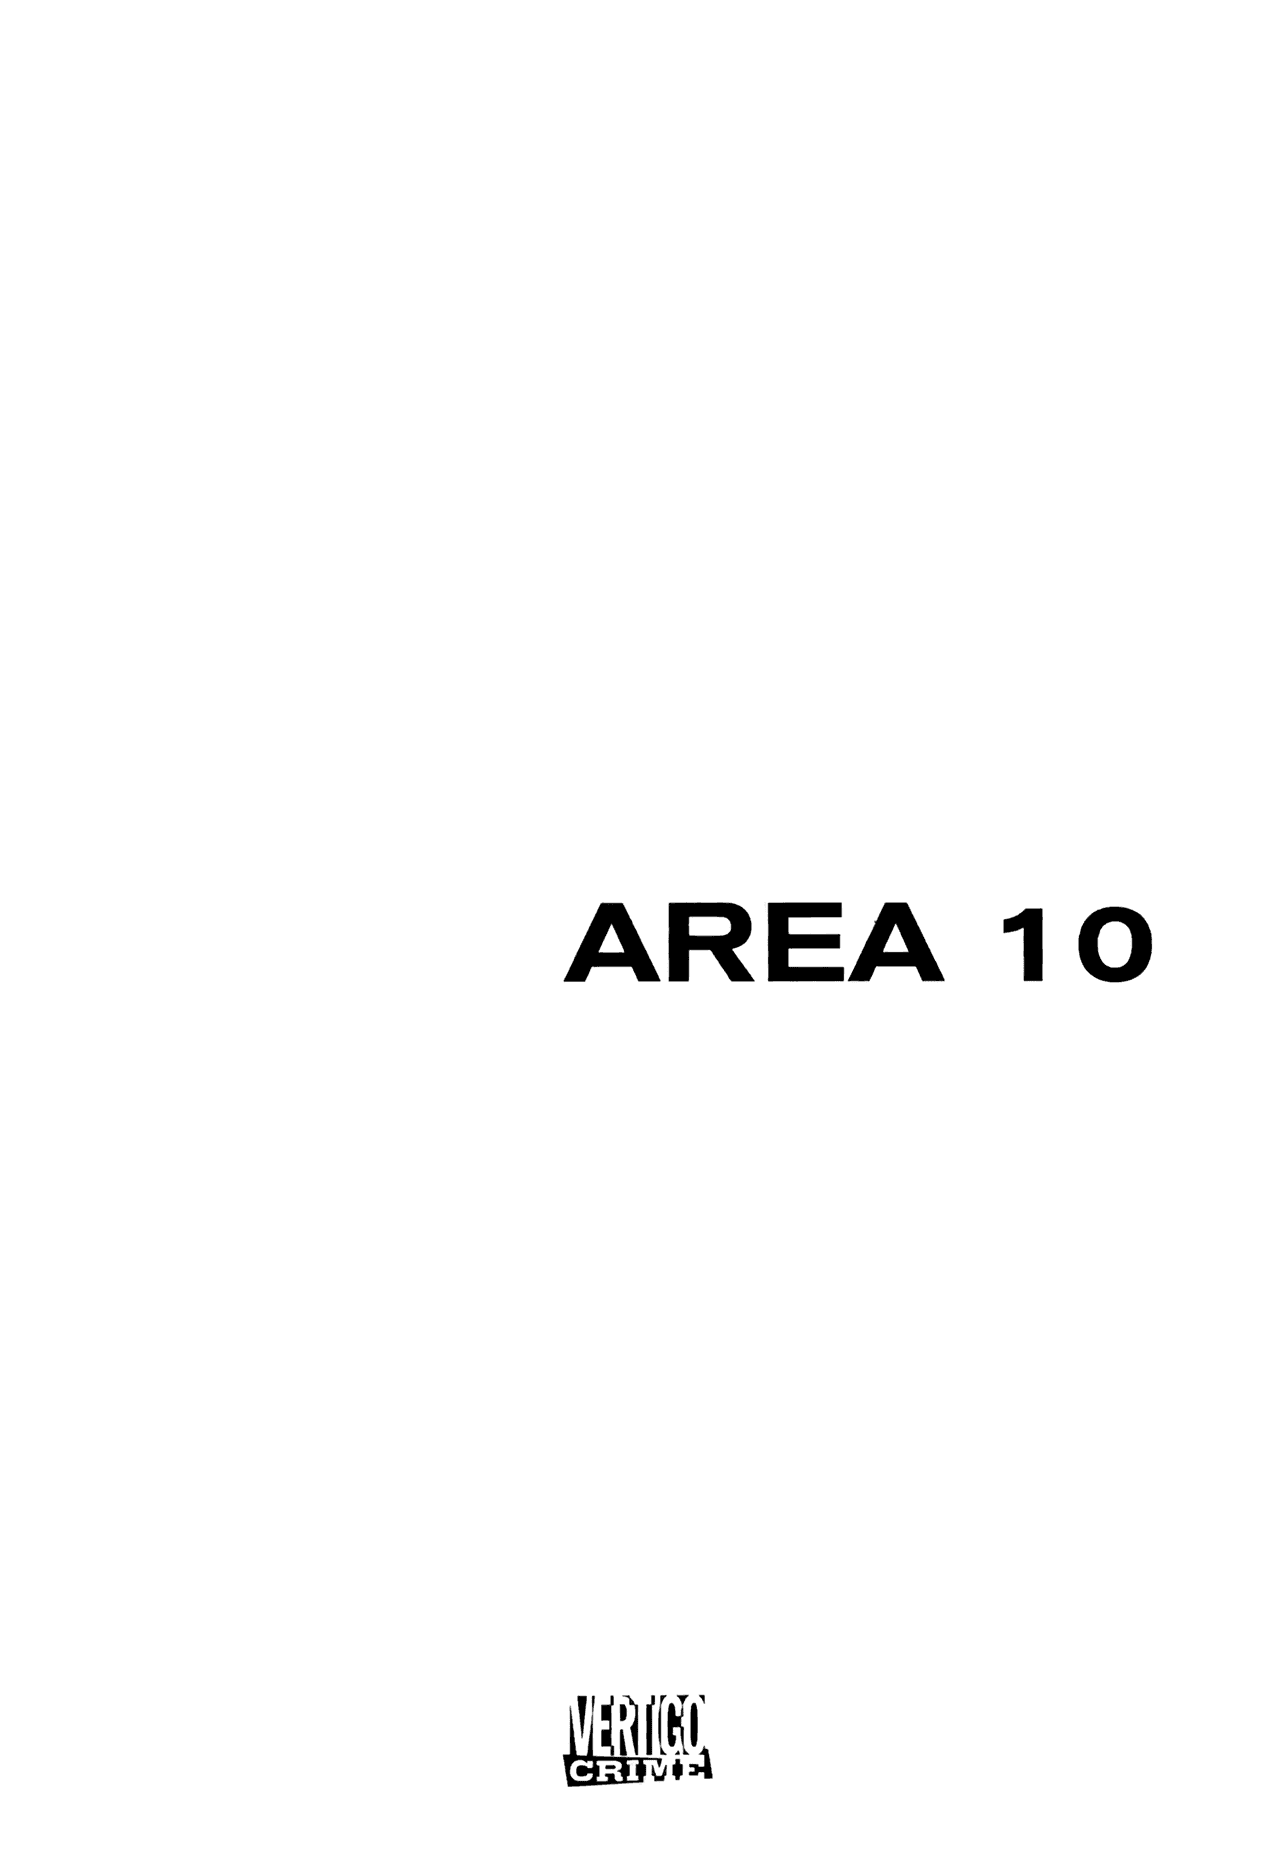 Read online Area 10 comic -  Issue # TPB - 4